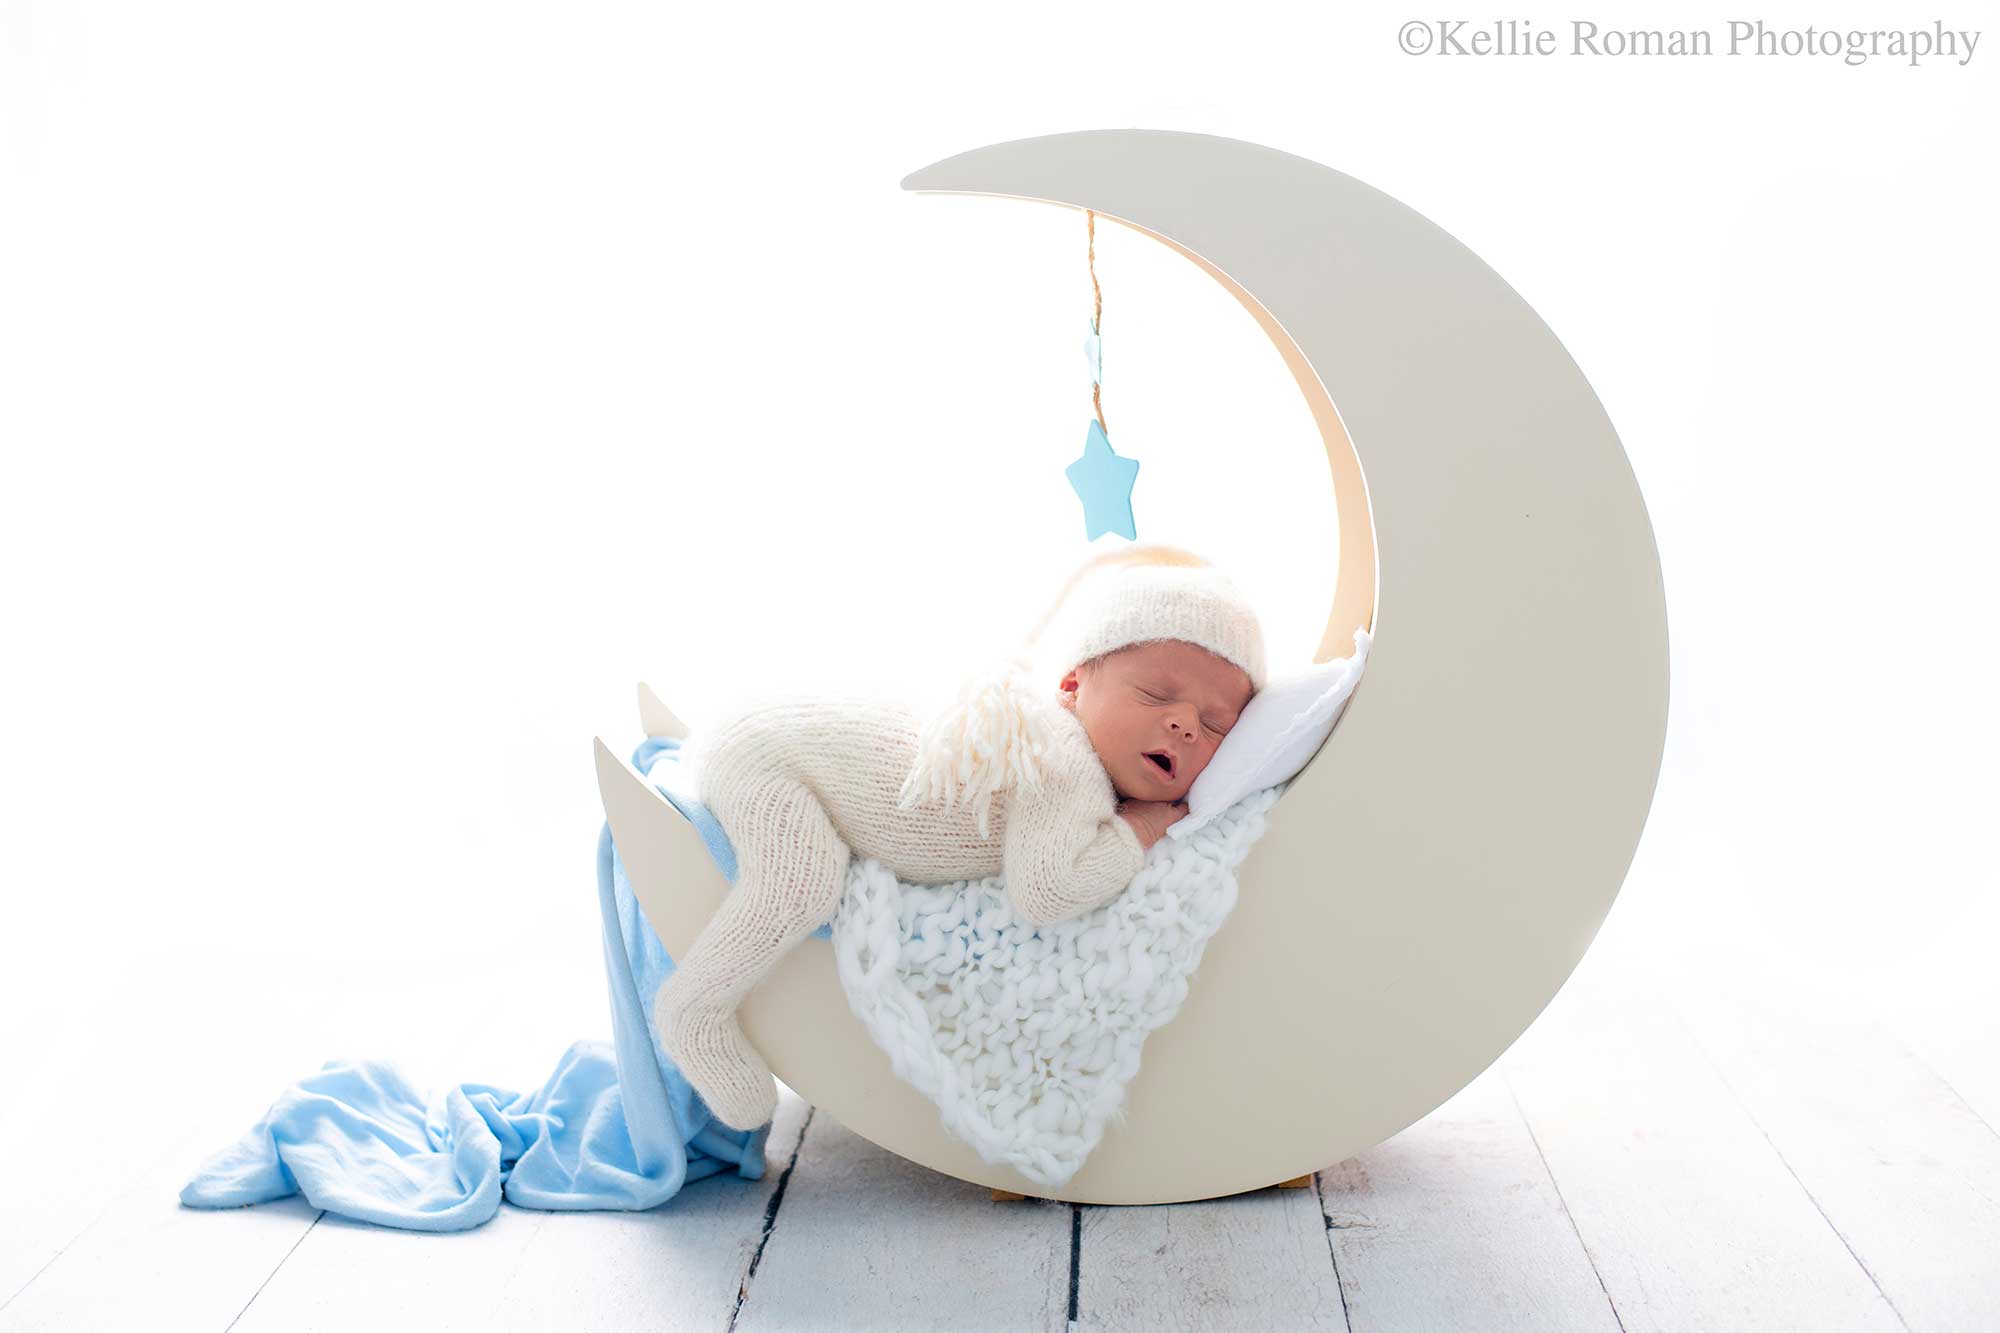 milwaukee newborn photographers. a newborn baby is is asleep on his belly on a cream wood moon. there are fabrics on the moon like a blue swaddle wrap. the newborn is wearing a cream knit footed romper. the backdrop is bright and white.